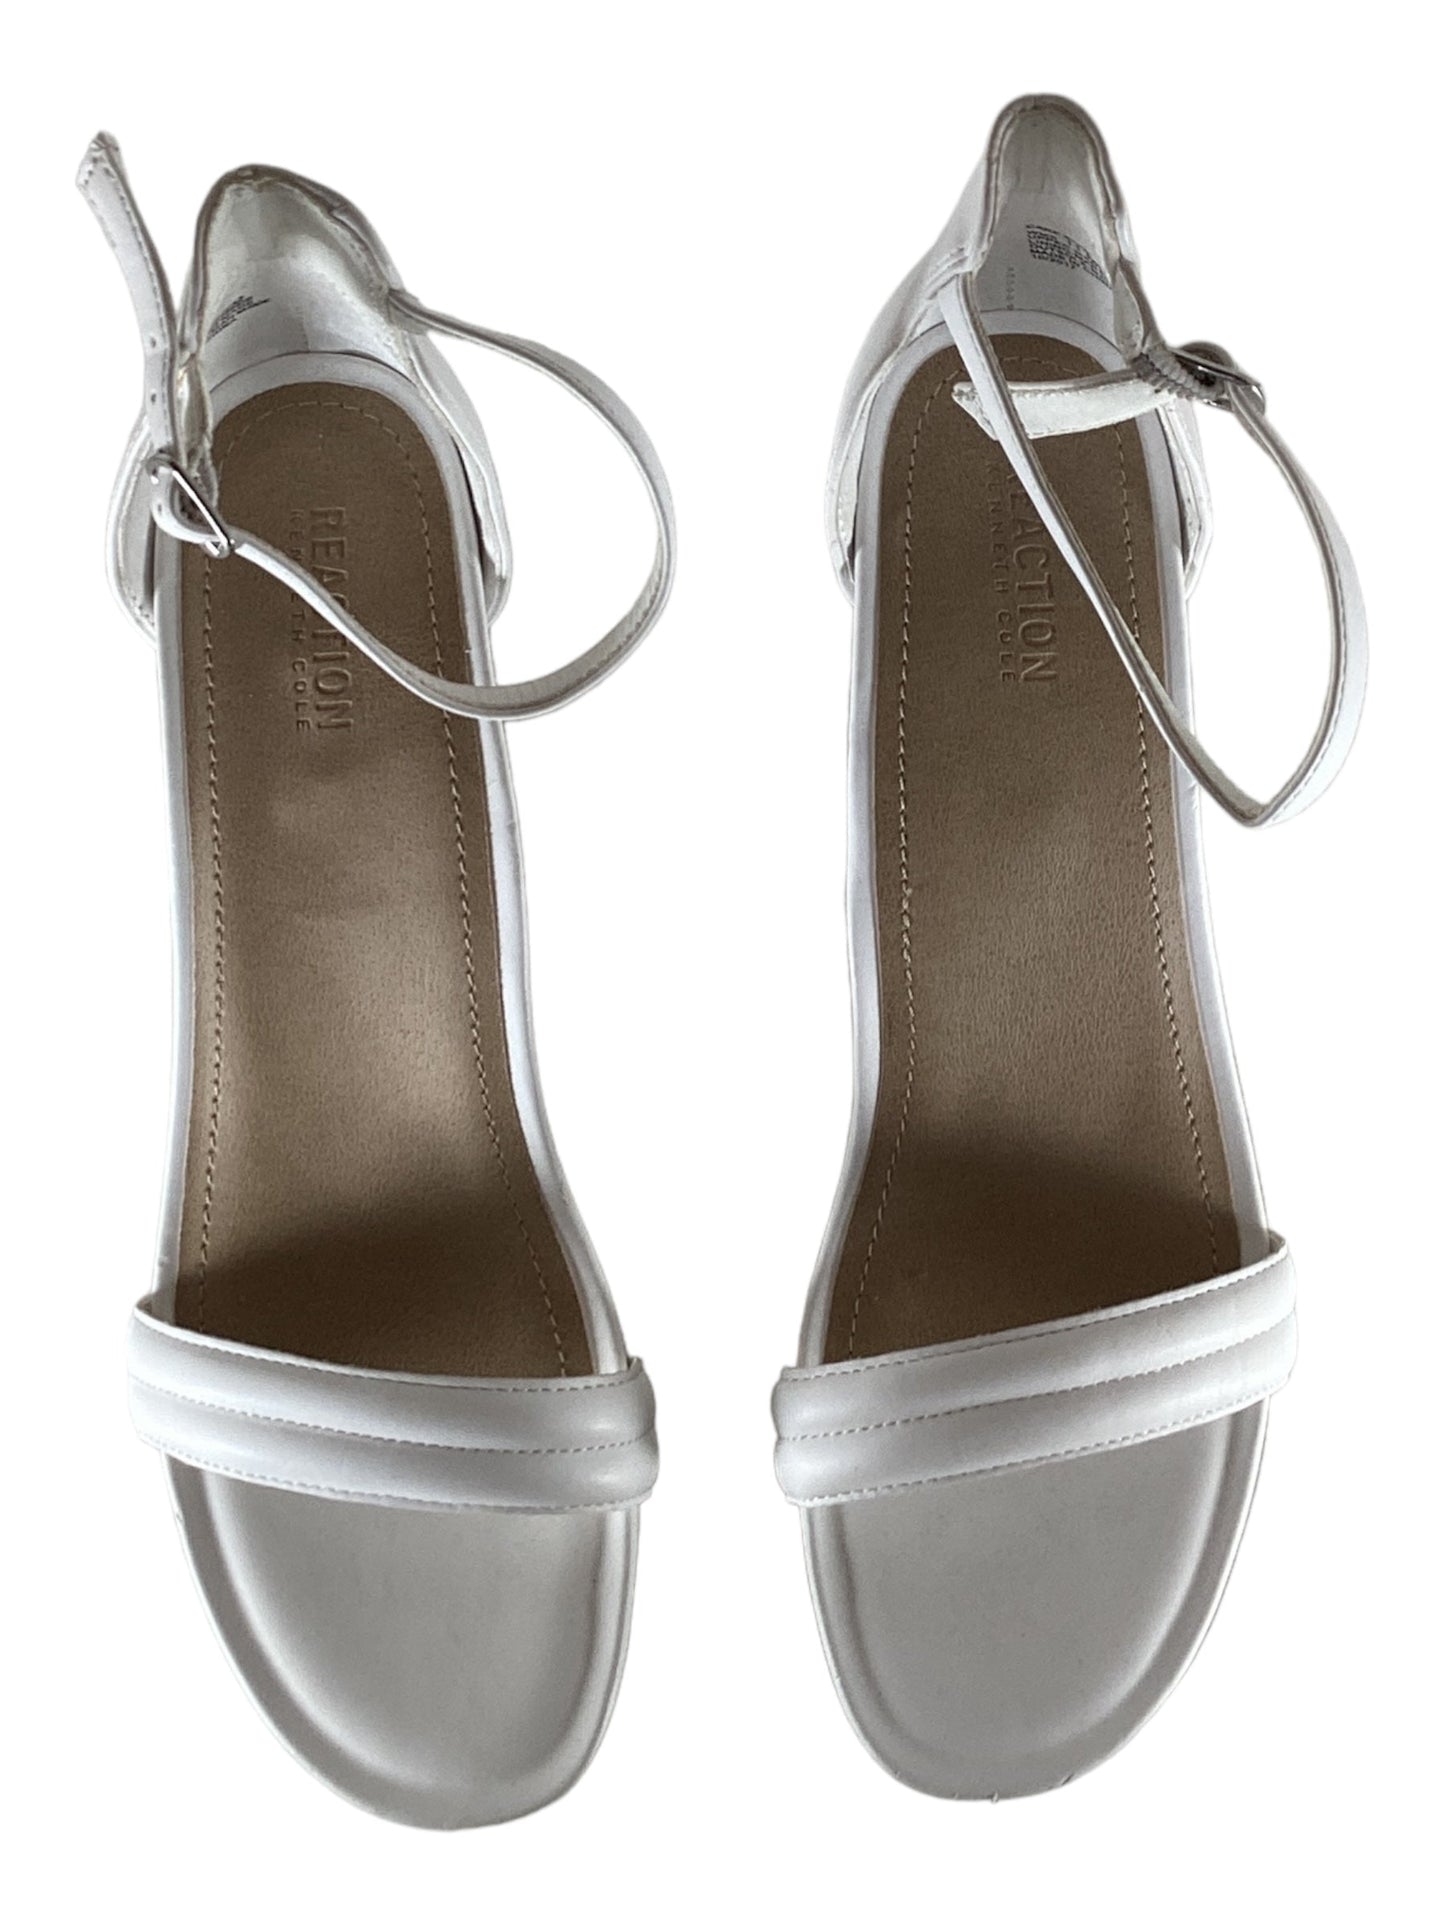 White Sandals Heels Wedge Clothes Mentor, Size 9